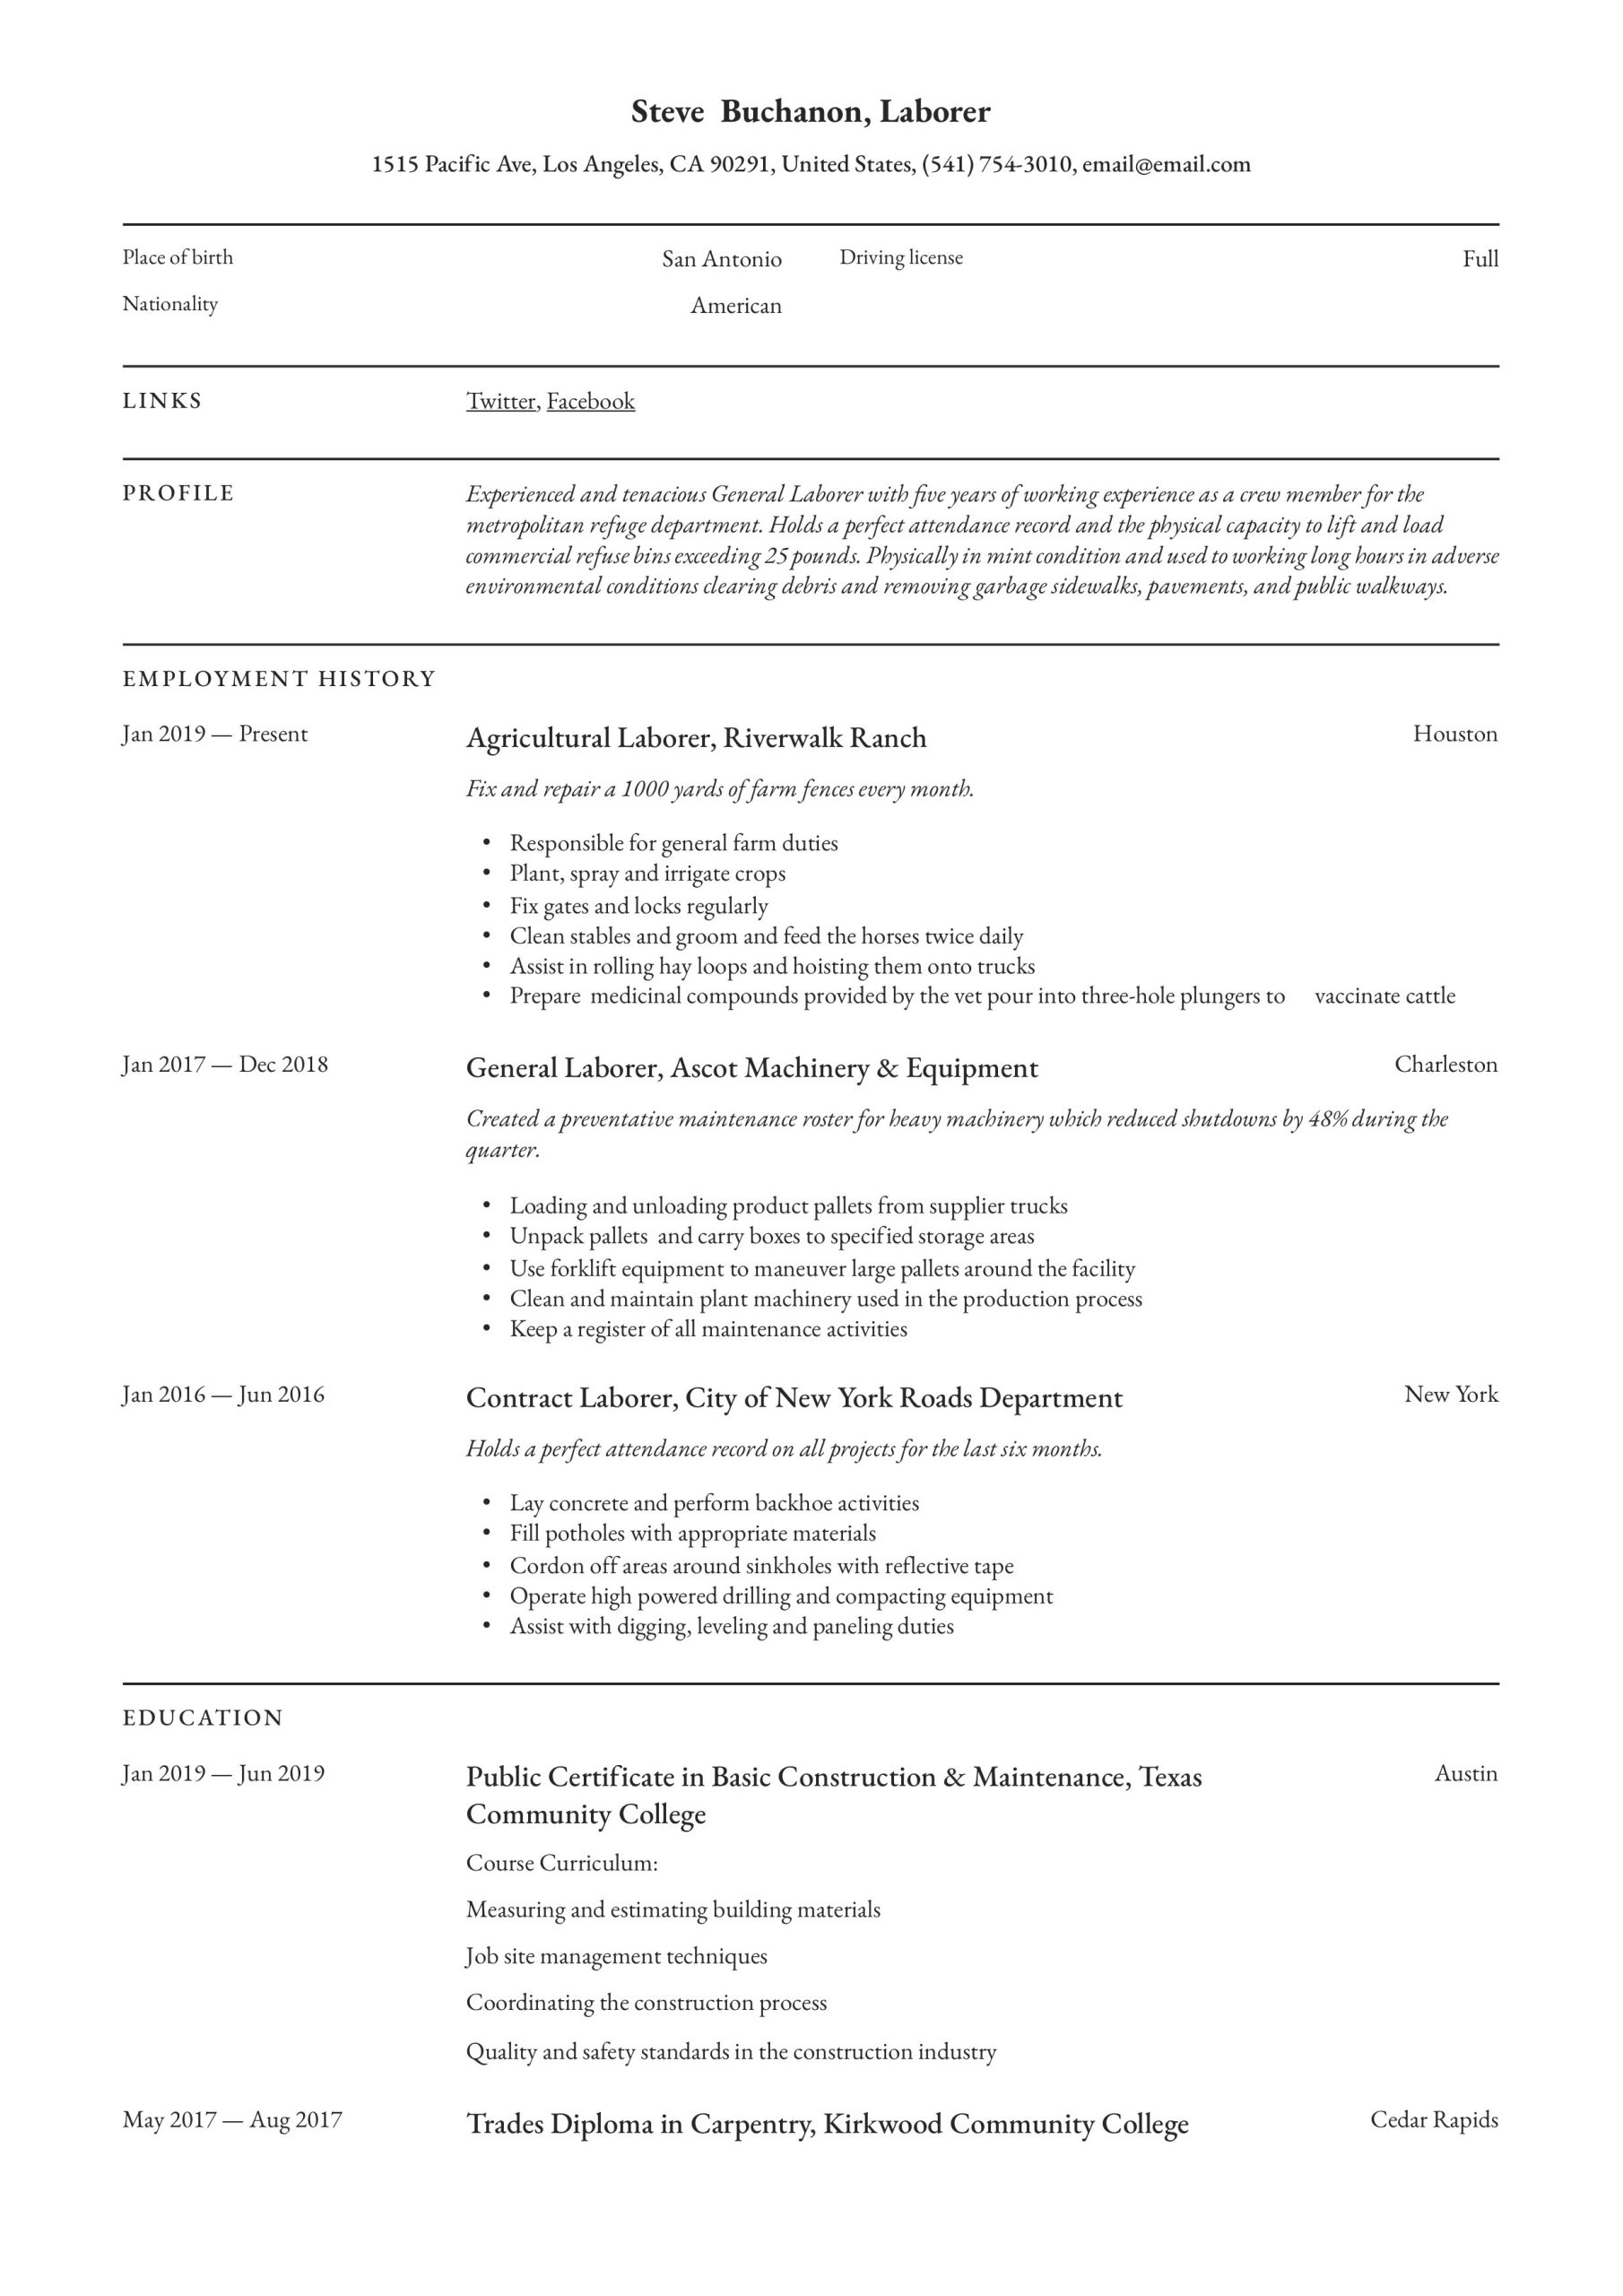 Resume for Laborer Jobs Free Sample General Laborer Resume & Writing Guide  12 Free Templates 2022